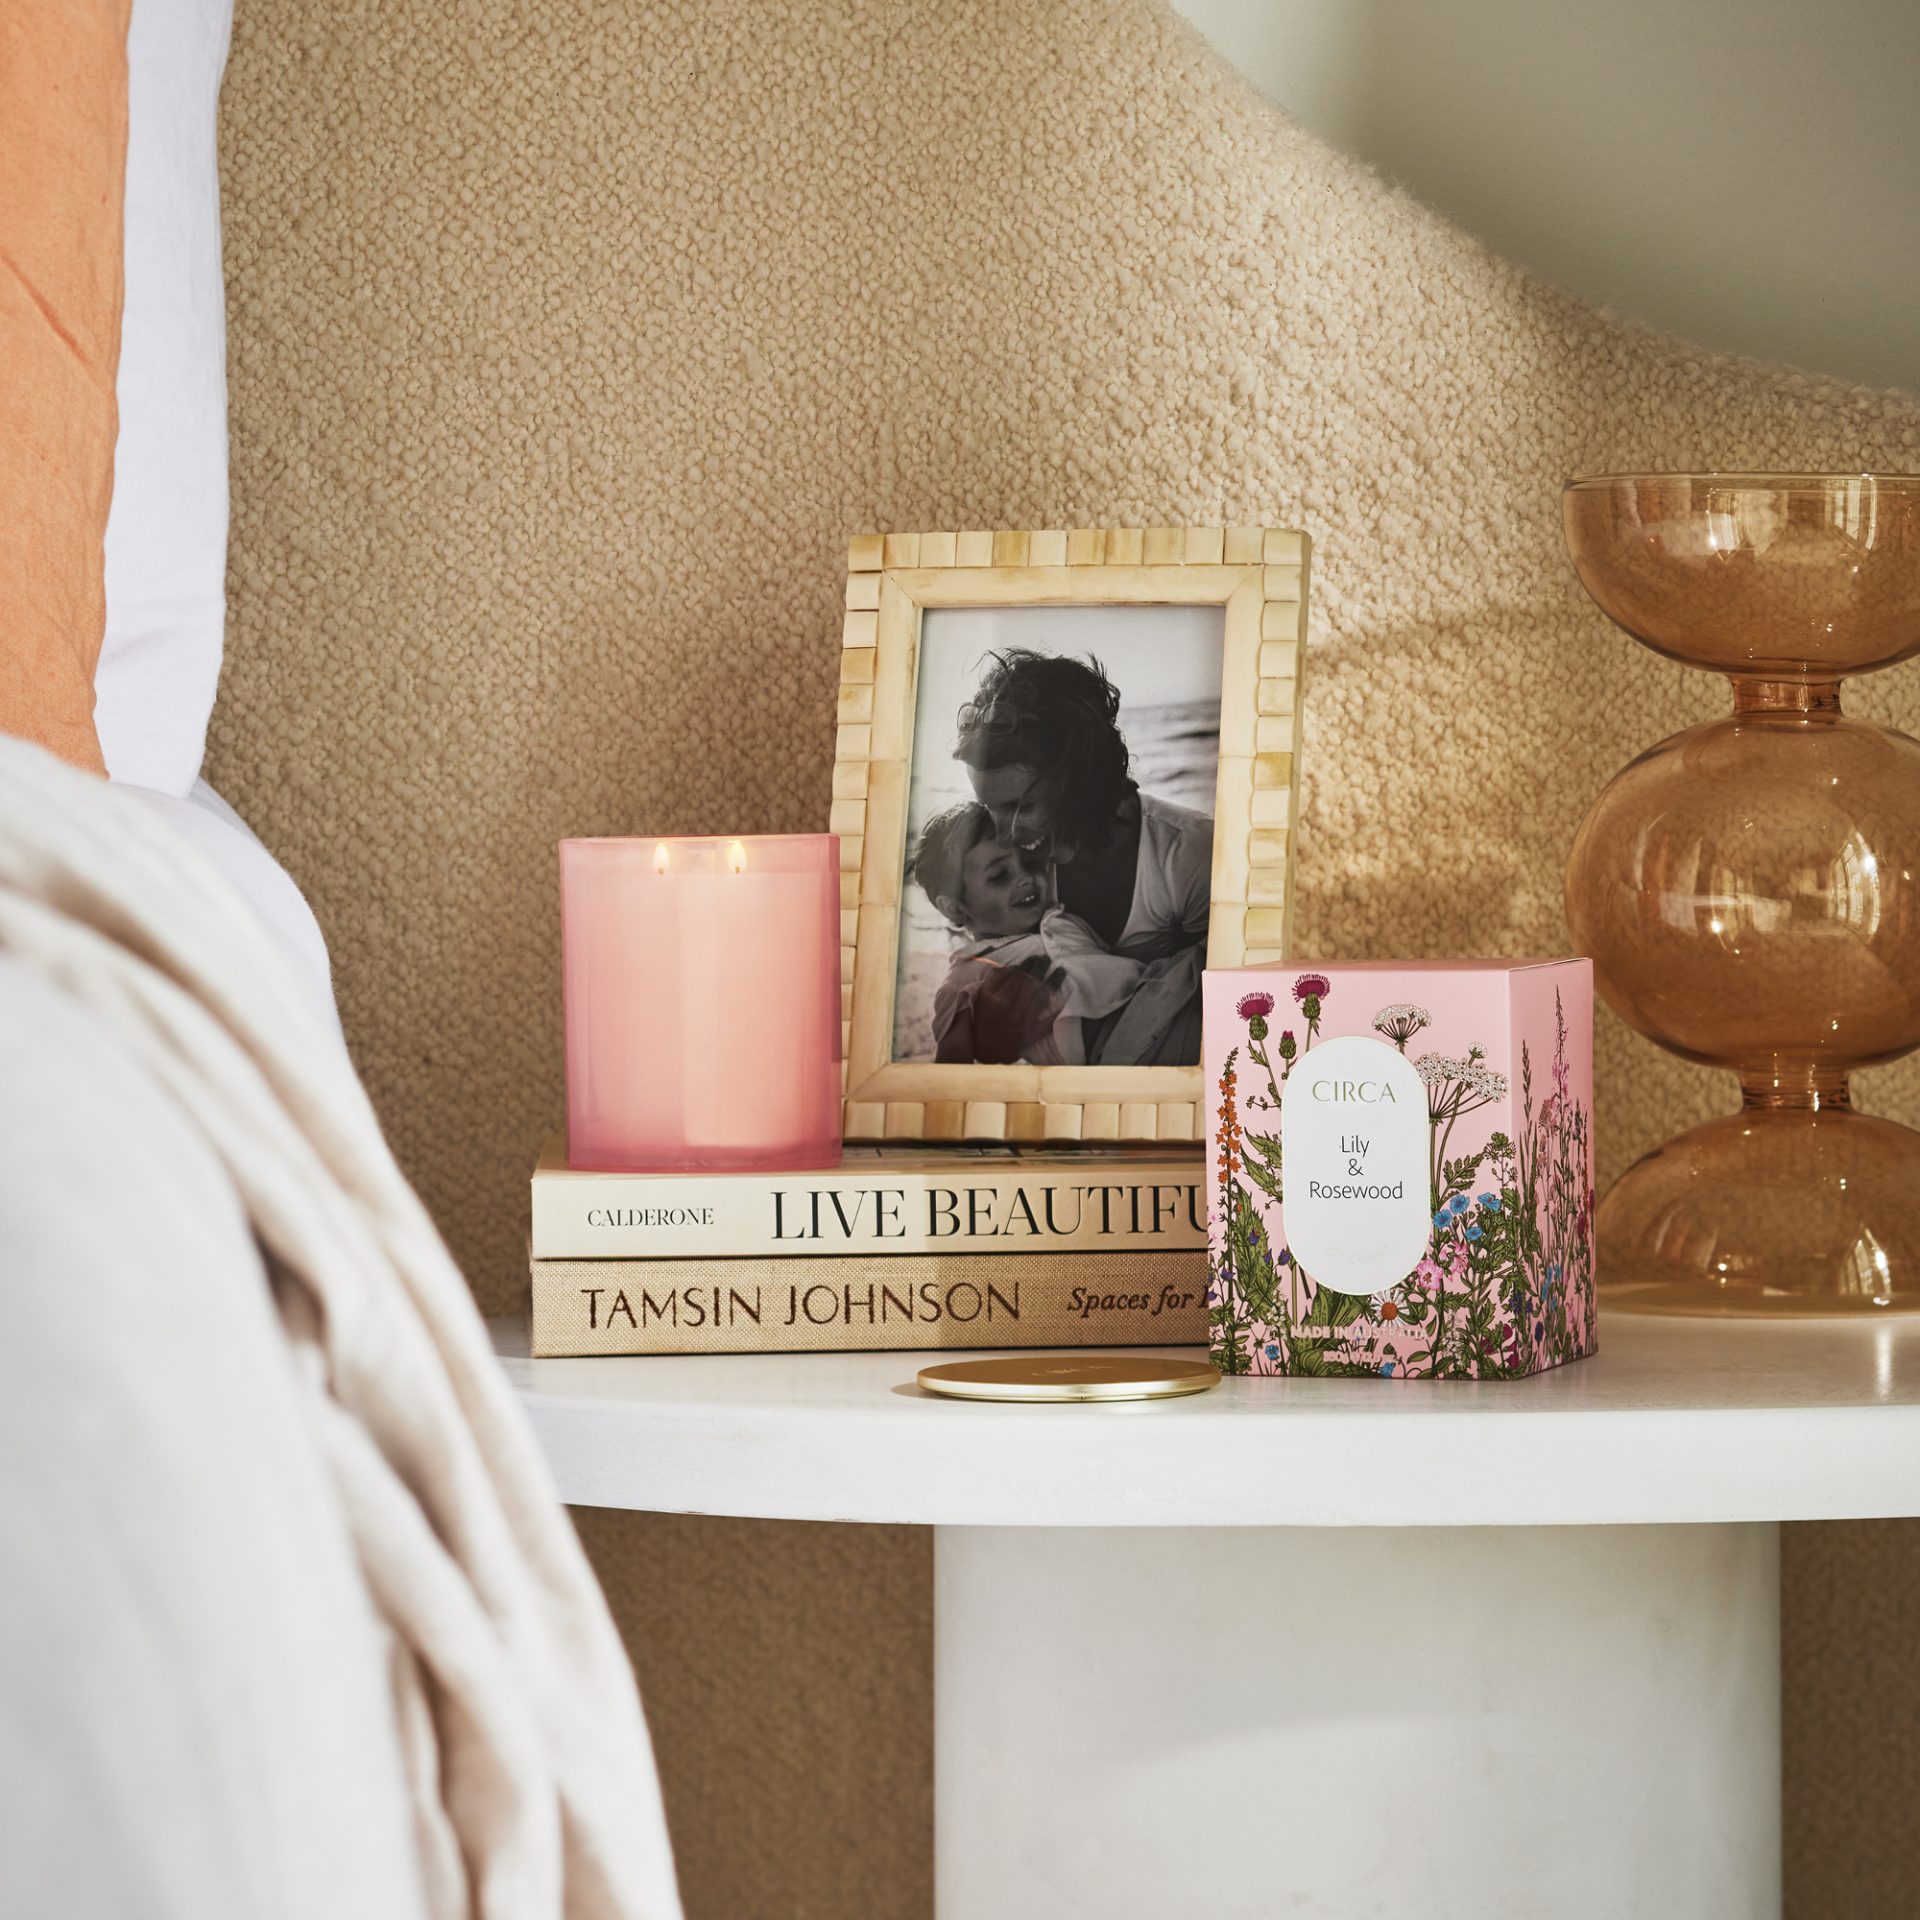 Our editor can’t stop raving about CIRCA home fragrance products – here’s why 3